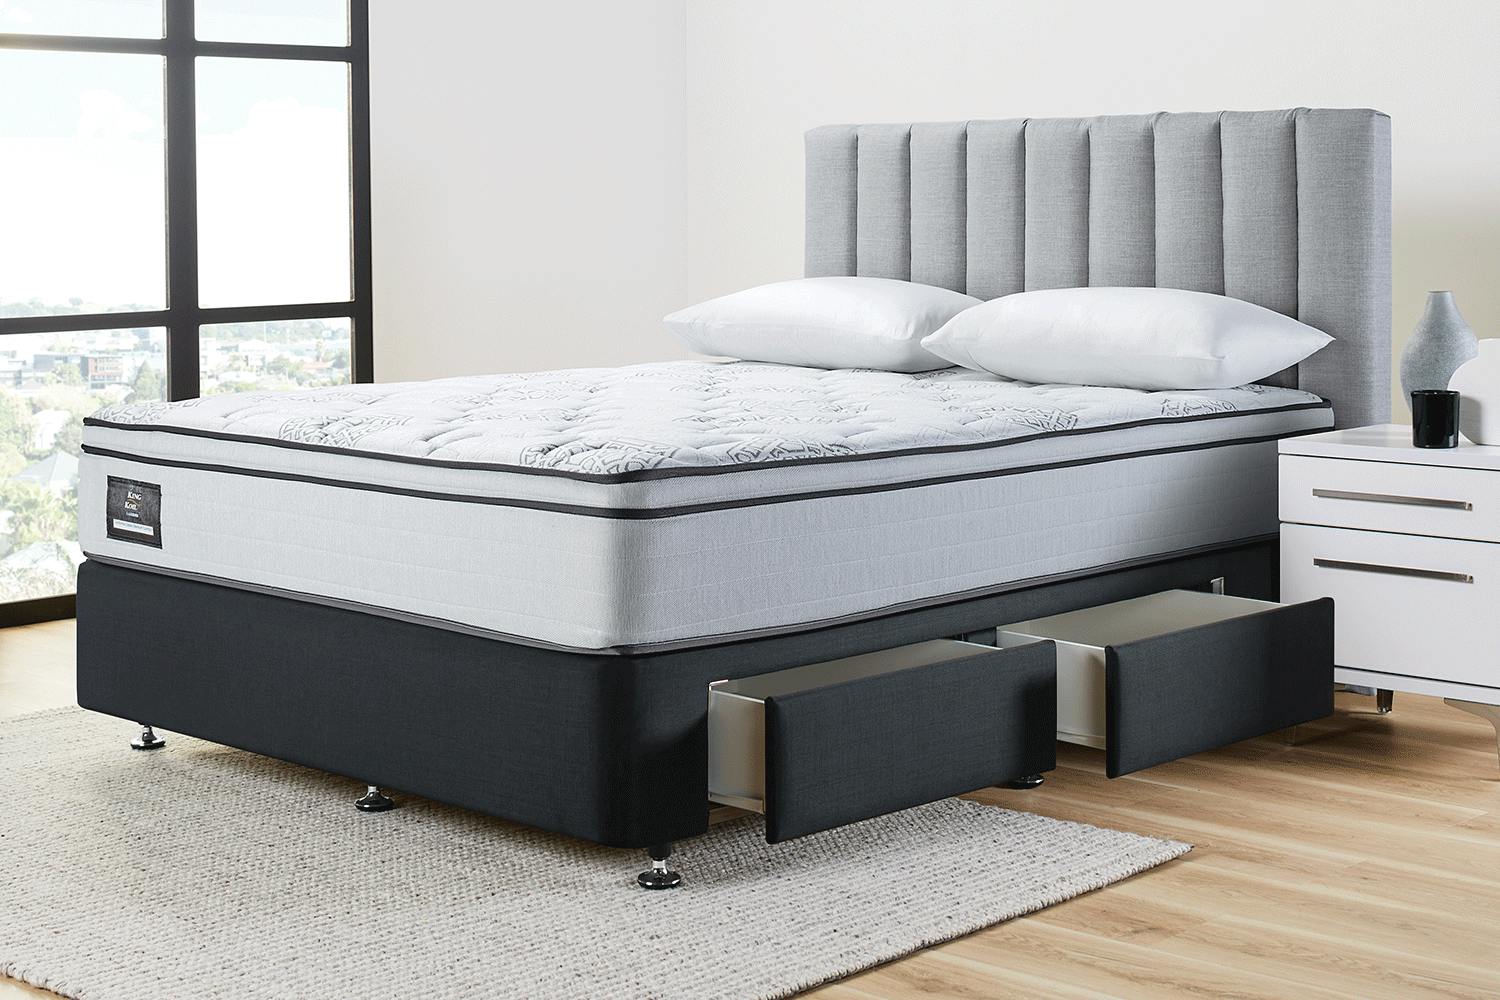 Conforma Classic Medium Californian King Bed With Drawer Base by King Koil